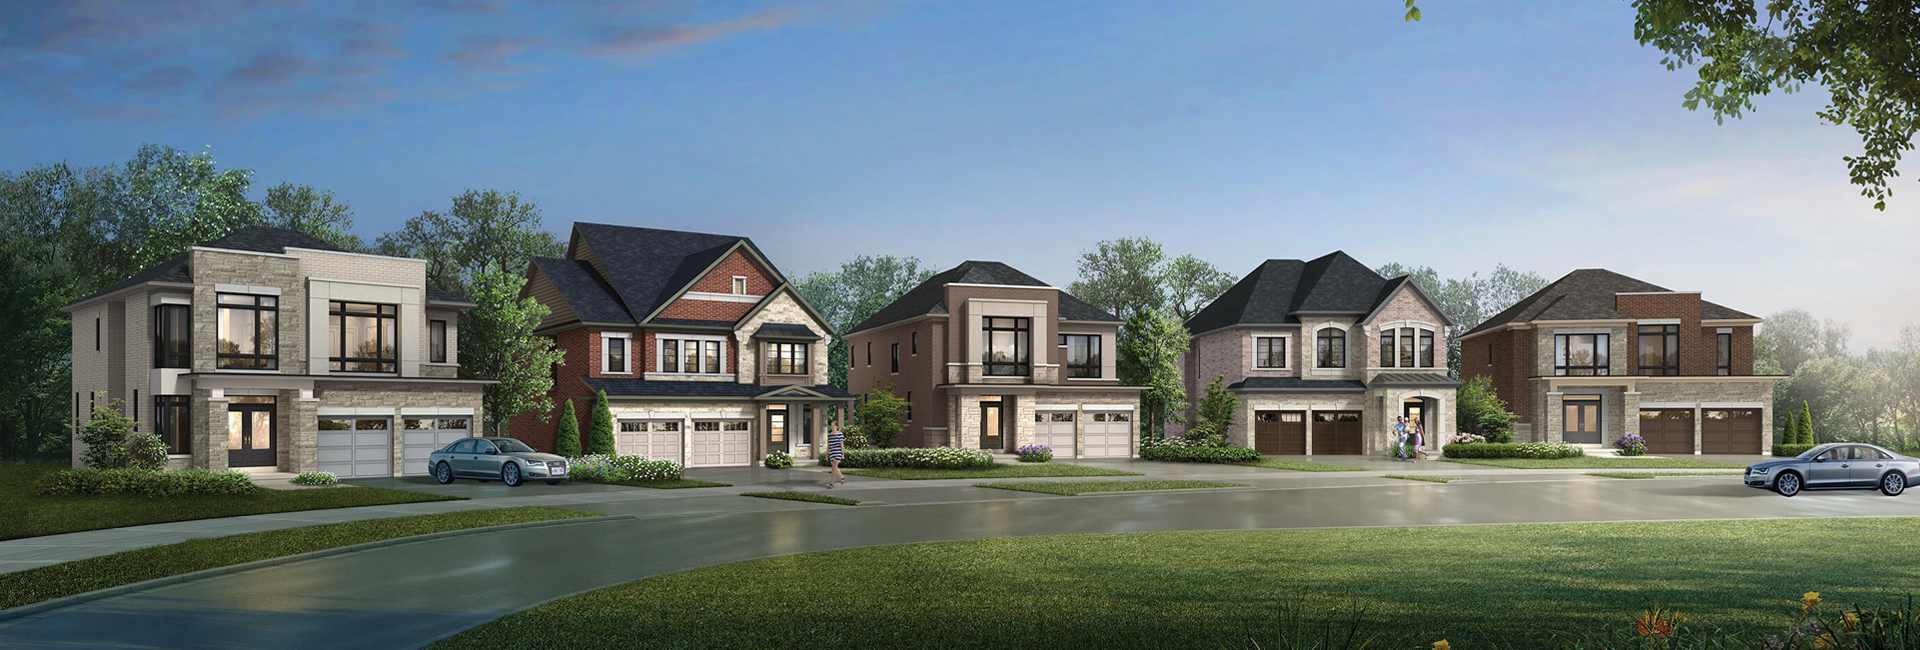 New Kleinburg Grand Opening April 6th at 10AM